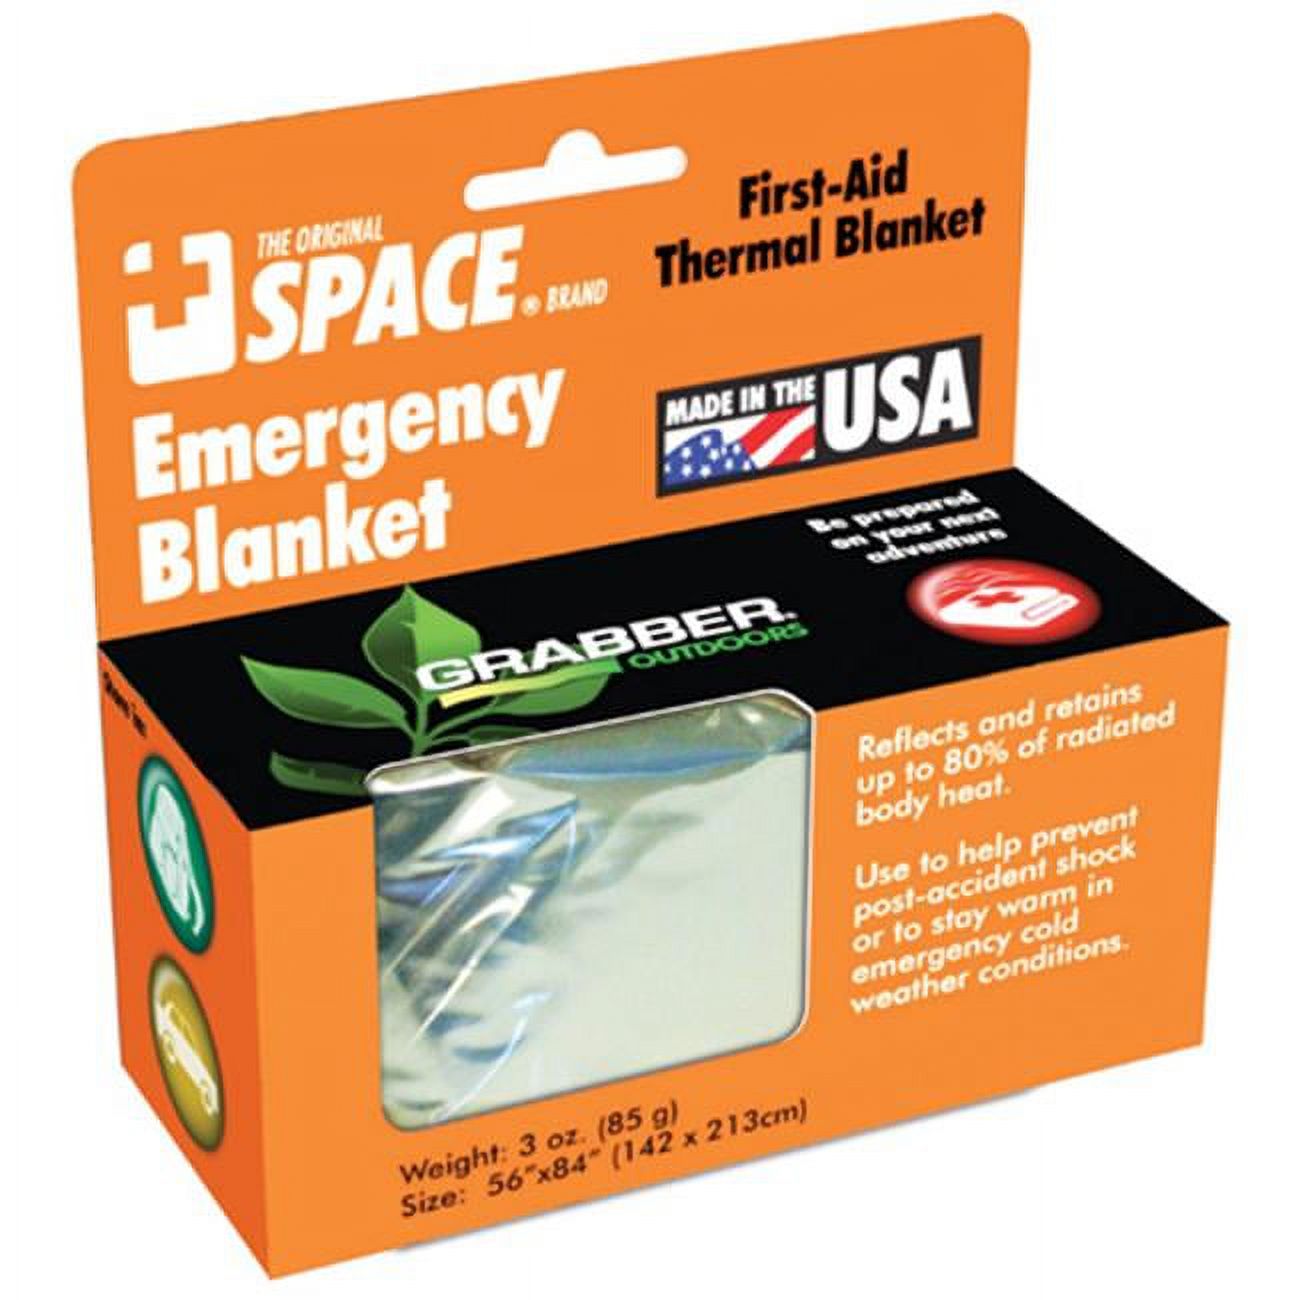 Grabber Outdoors The Original Space Brand Emergency Survival Blanket, Silver, 3oz. 56" X 84" - image 1 of 2